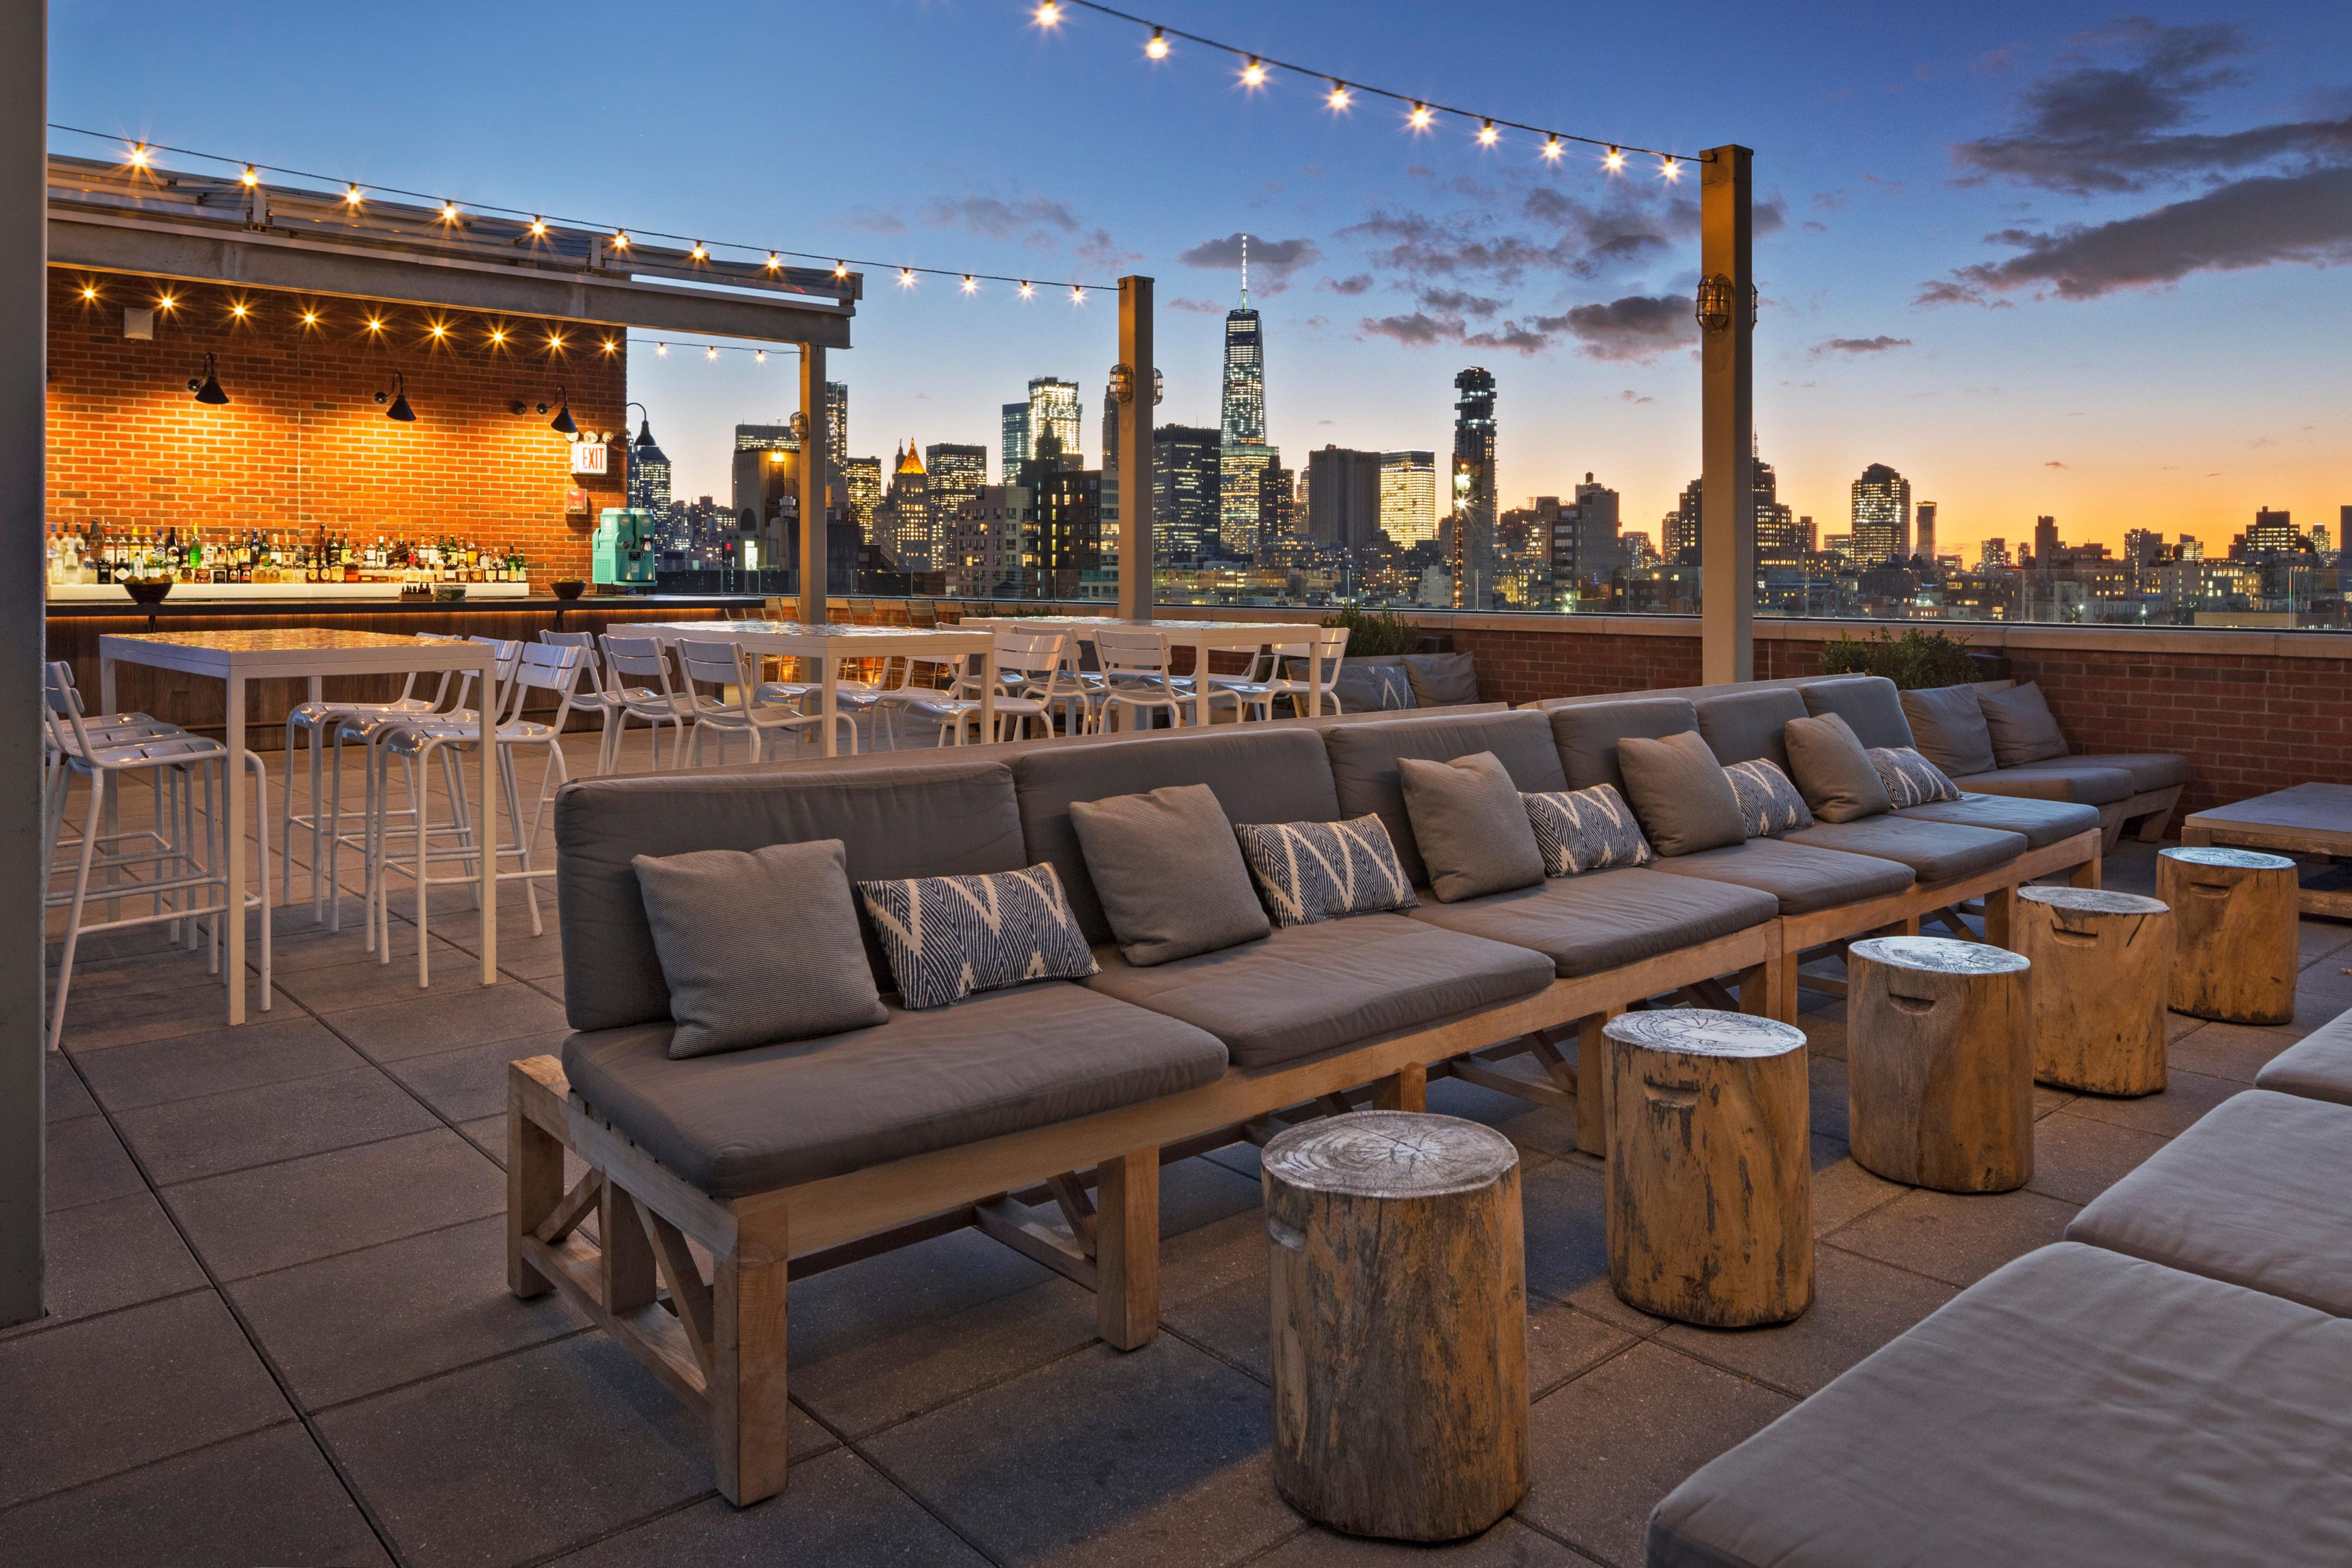 Elevate your mood at Mr. Purple, our hip rooftop bar and restaurant overlooking NYC’s Lower East Side. Located on the hotel’s 15th floor, our rooftop bar captures the vibrant and creative spirit of the LES with an artist-loft ambiance and flowing indoor and outdoor spaces. Enjoy cocktails and light fare with views of Manhattan’s neighborhood.